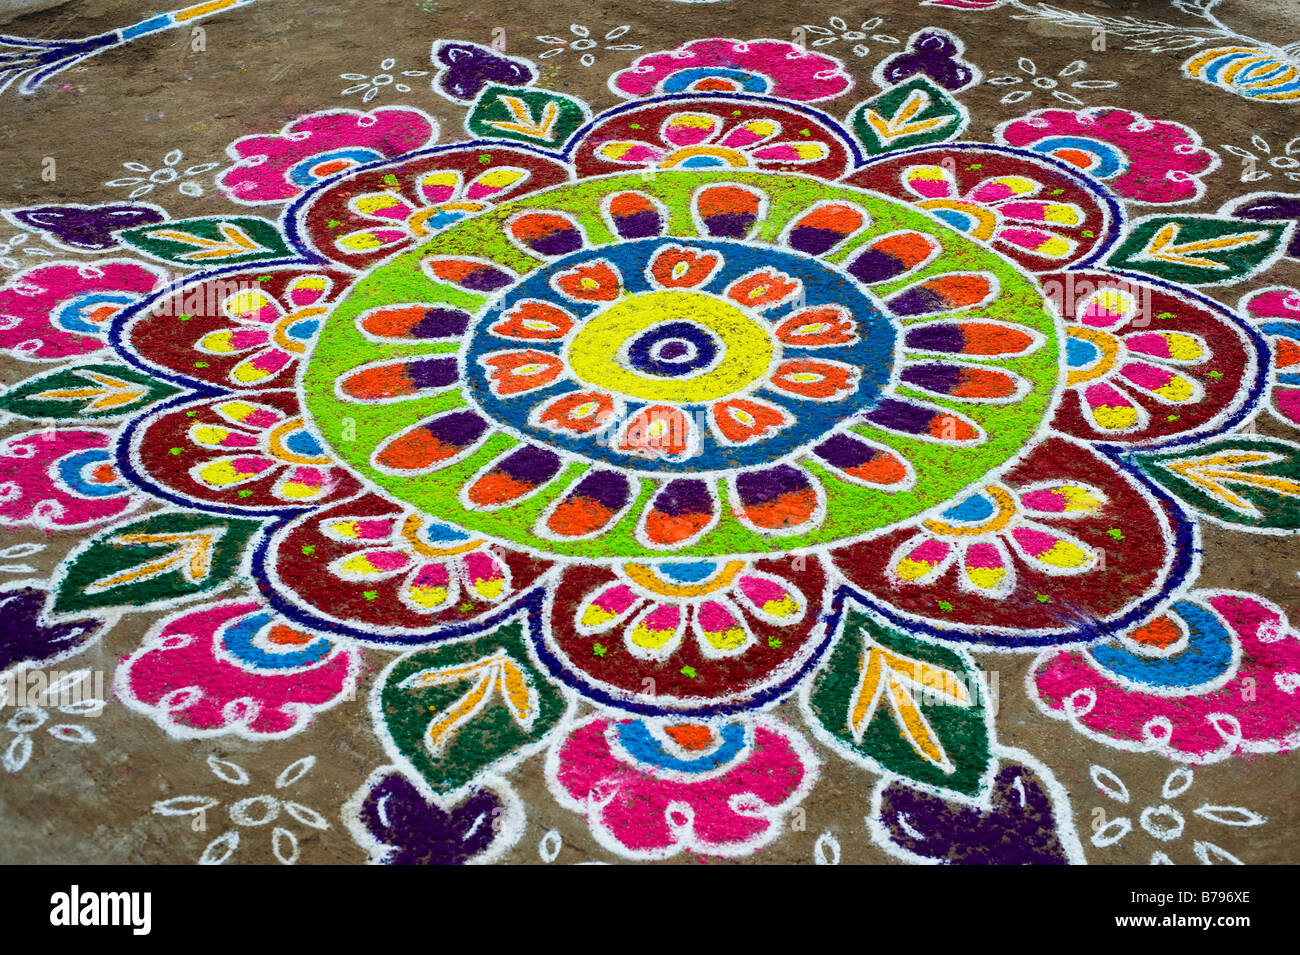 Rangoli festival designs in an Indian street made at the hindu ...